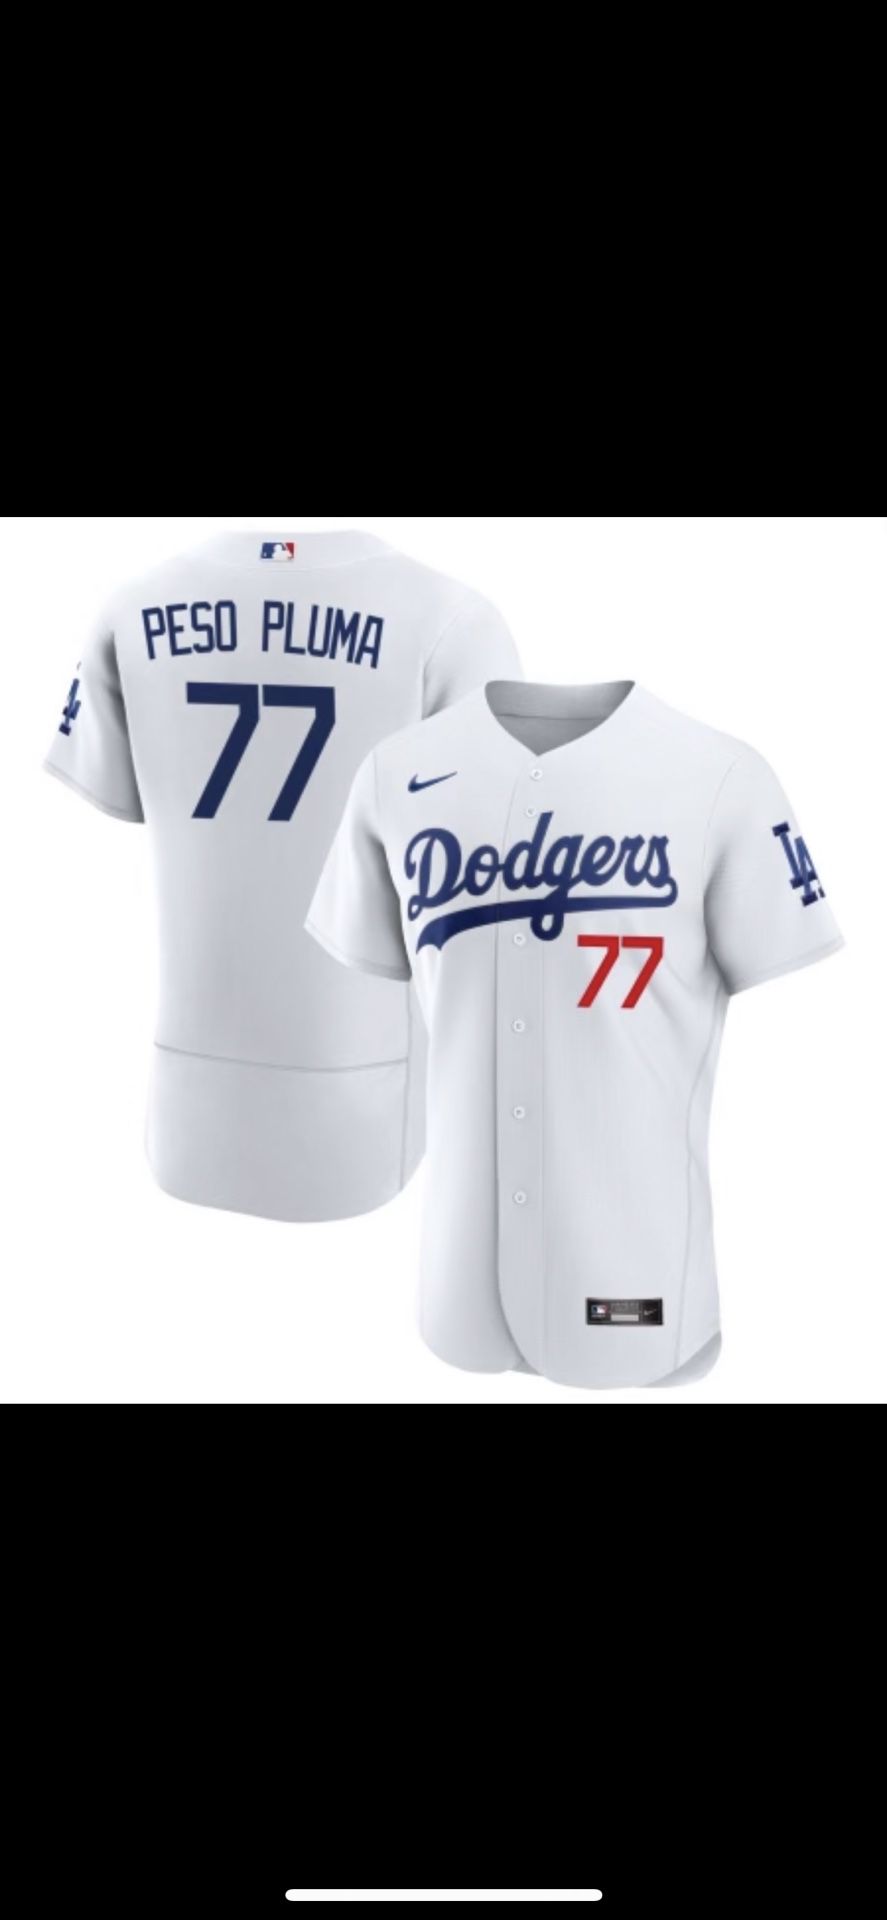 Peso Pluma DODGERS JERSEYS Nike Stitched Mens Womens And Kid Sizes for Sale  in Fontana, CA - OfferUp